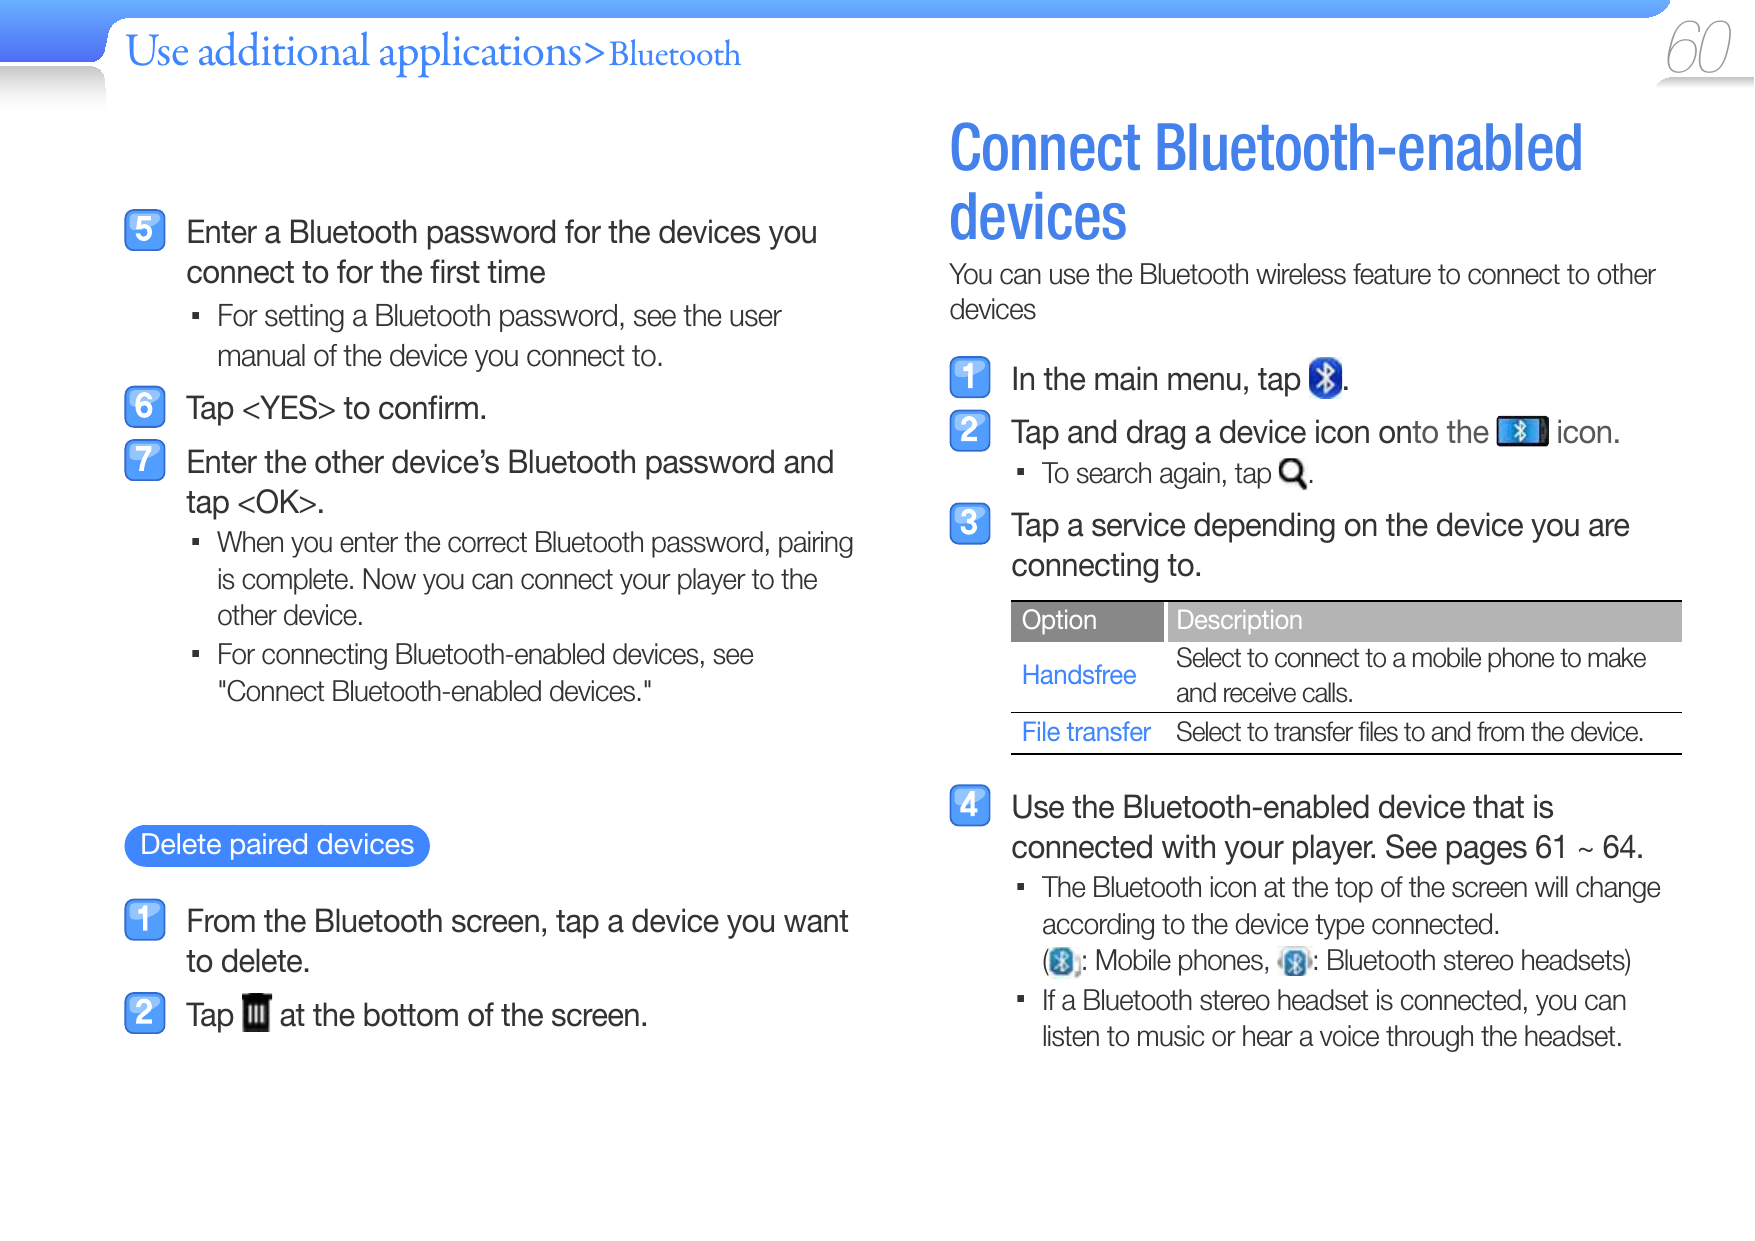 Use additional applications&gt;Bluetooth 60  Enter a Bluetooth password for the devices you connect to for the ﬁ rst timeFor setting a Bluetooth password, see the user  manual of the device you connect to.  Tap &lt;YES&gt; to conﬁ rm.  Enter the other device’s Bluetooth password and tap &lt;OK&gt;.When you enter the correct Bluetooth password, pairing  is complete. Now you can connect your player to the other device. For connecting Bluetooth-enabled devices, see  &quot;Connect Bluetooth-enabled devices.&quot;   Delete paired devices    From the Bluetooth screen, tap a device you want to delete. Tap   at the bottom of the screen.  Connect  Bluetooth-enabled devicesYou can use the Bluetooth wireless feature to connect to other devices  In the main menu, tap  .  Tap and drag a device icon onto the   icon.To search again, tap  .  Tap a service depending on the device you are connecting to.Option DescriptionHandsfree Select to connect to a mobile phone to make and receive calls.File transfer Select to transfer ﬁ les to and from the device.  Use the Bluetooth-enabled device that is connected with your player. See pages 61 ~ 64.The Bluetooth icon at the top of the screen will change  according to the device type connected. (: Mobile phones,  : Bluetooth stereo headsets)If a Bluetooth stereo headset is connected, you can  listen to music or hear a voice through the headset.